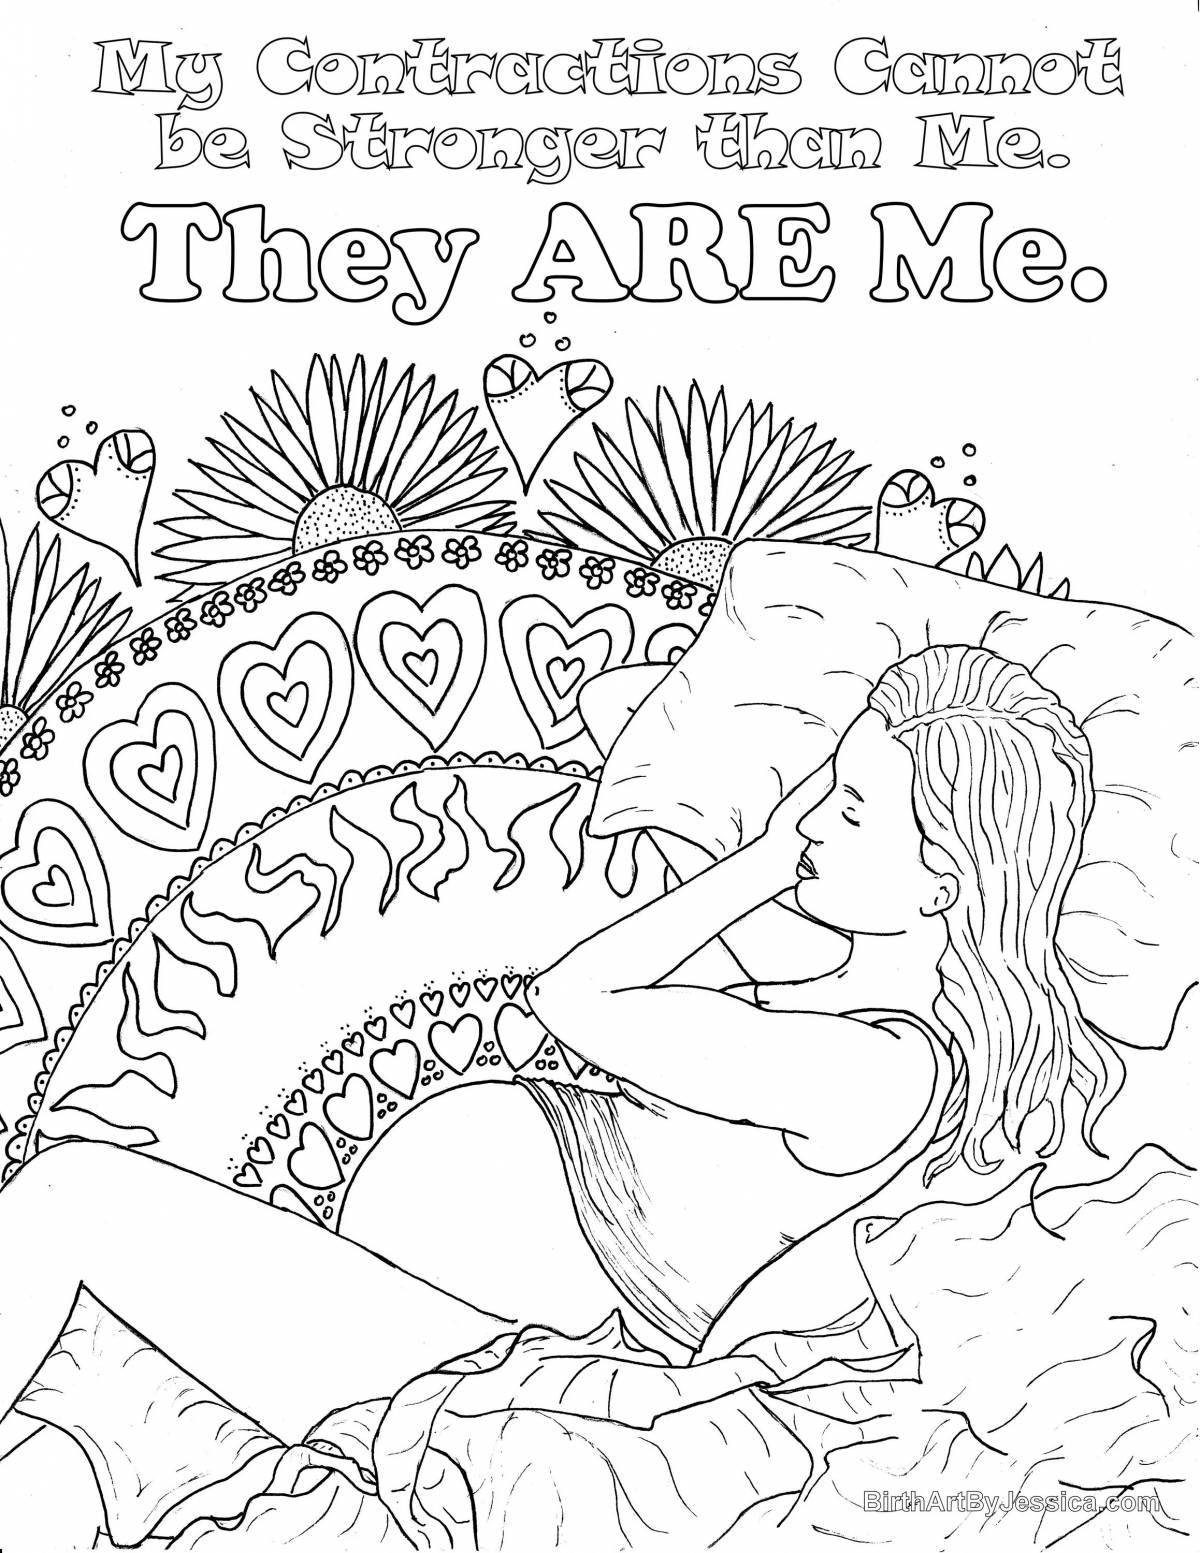 Great pregnant coloring book